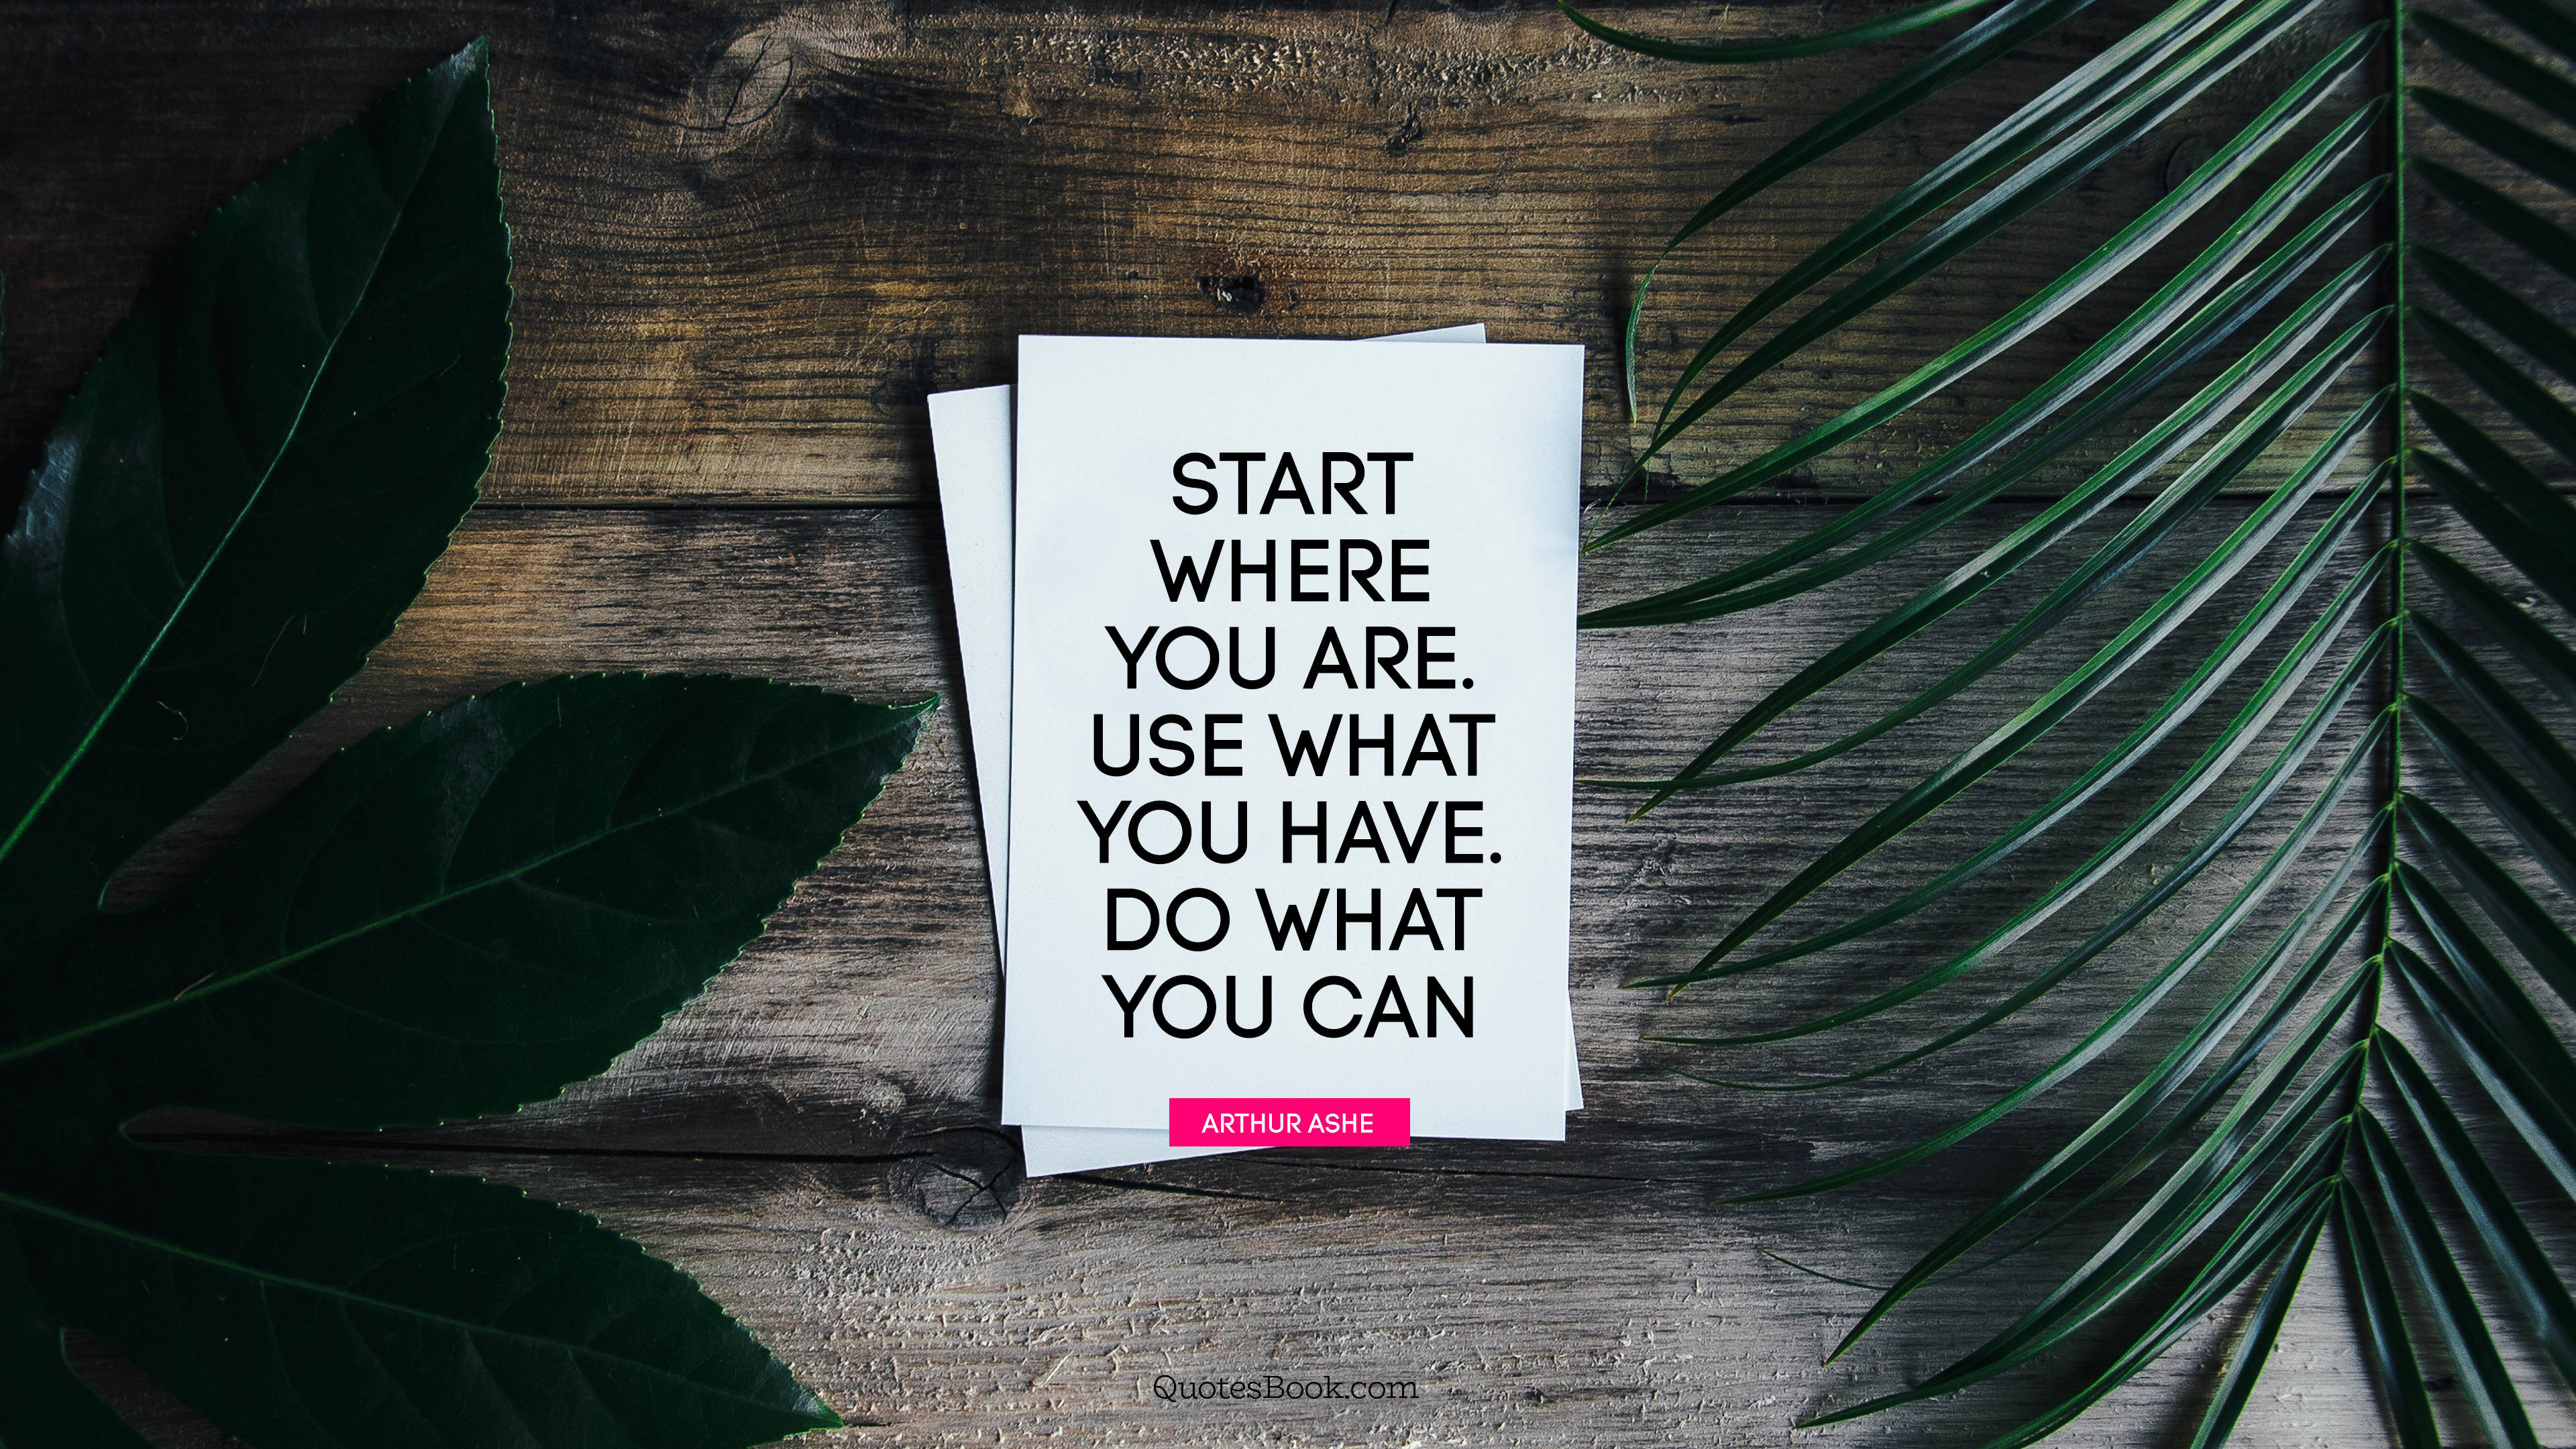 start where you are use what you have do what you can 3840x2160 1207